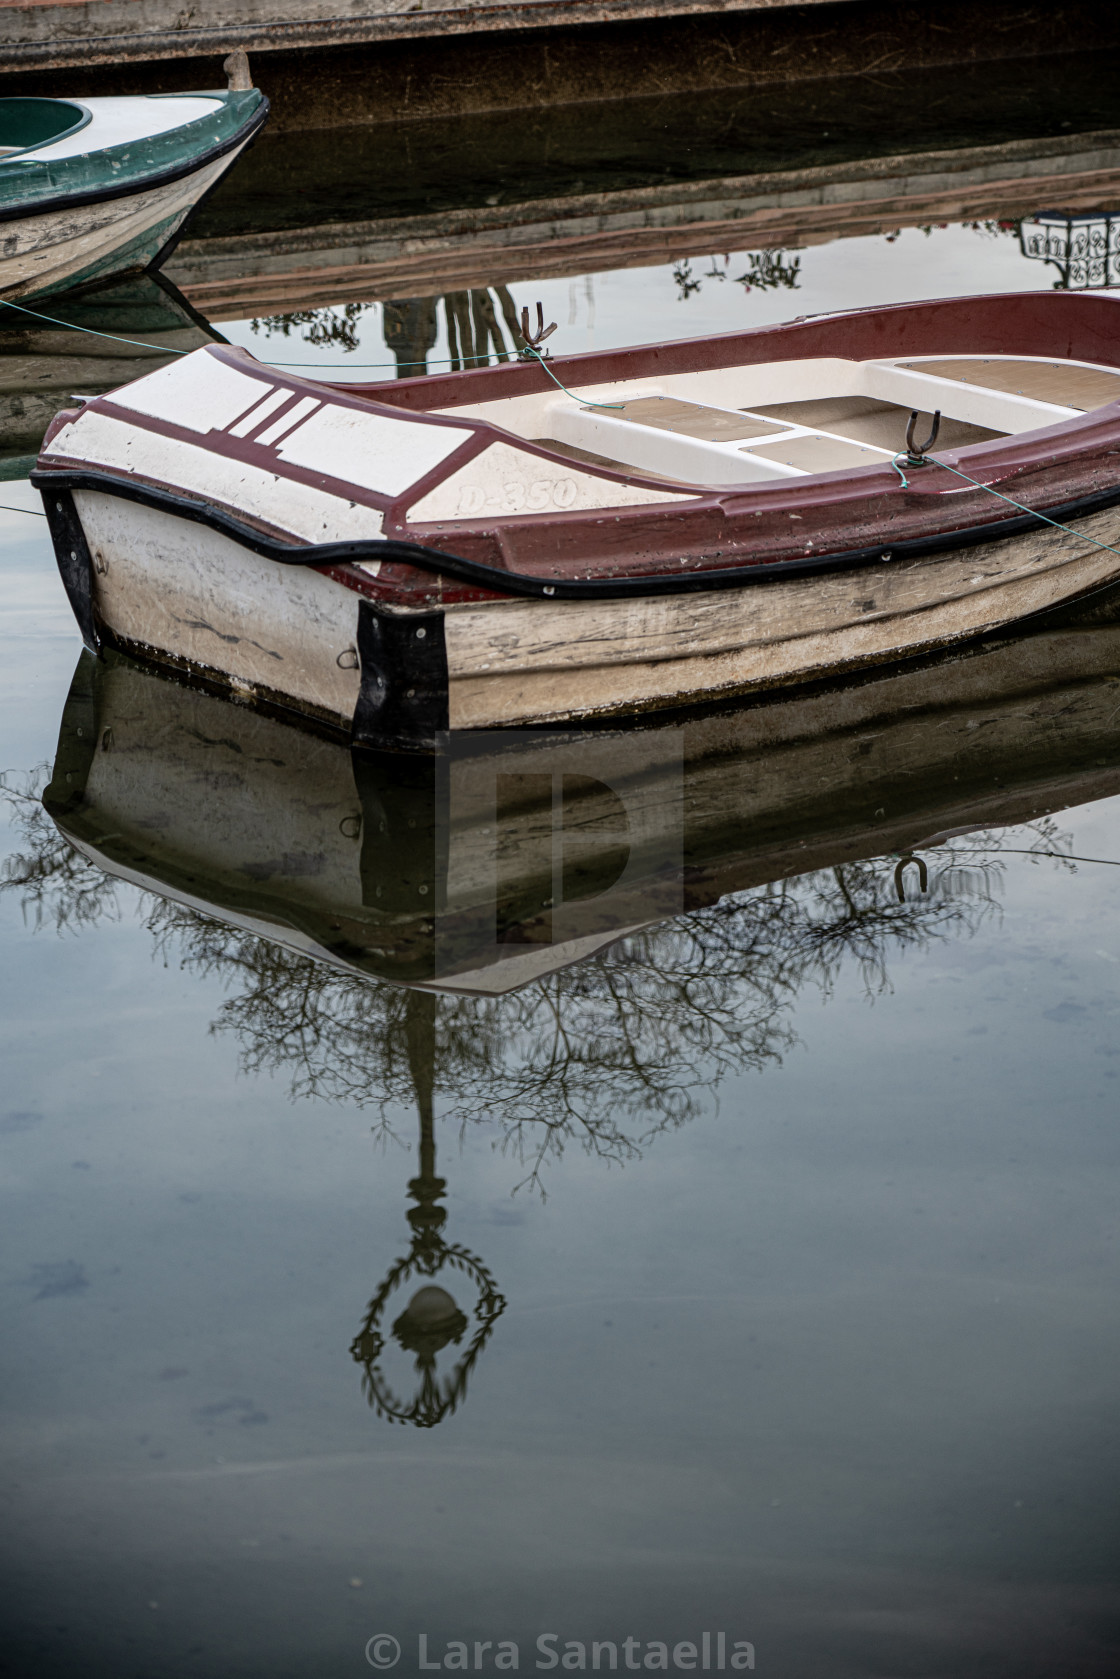 "The reflection of a boat" stock image